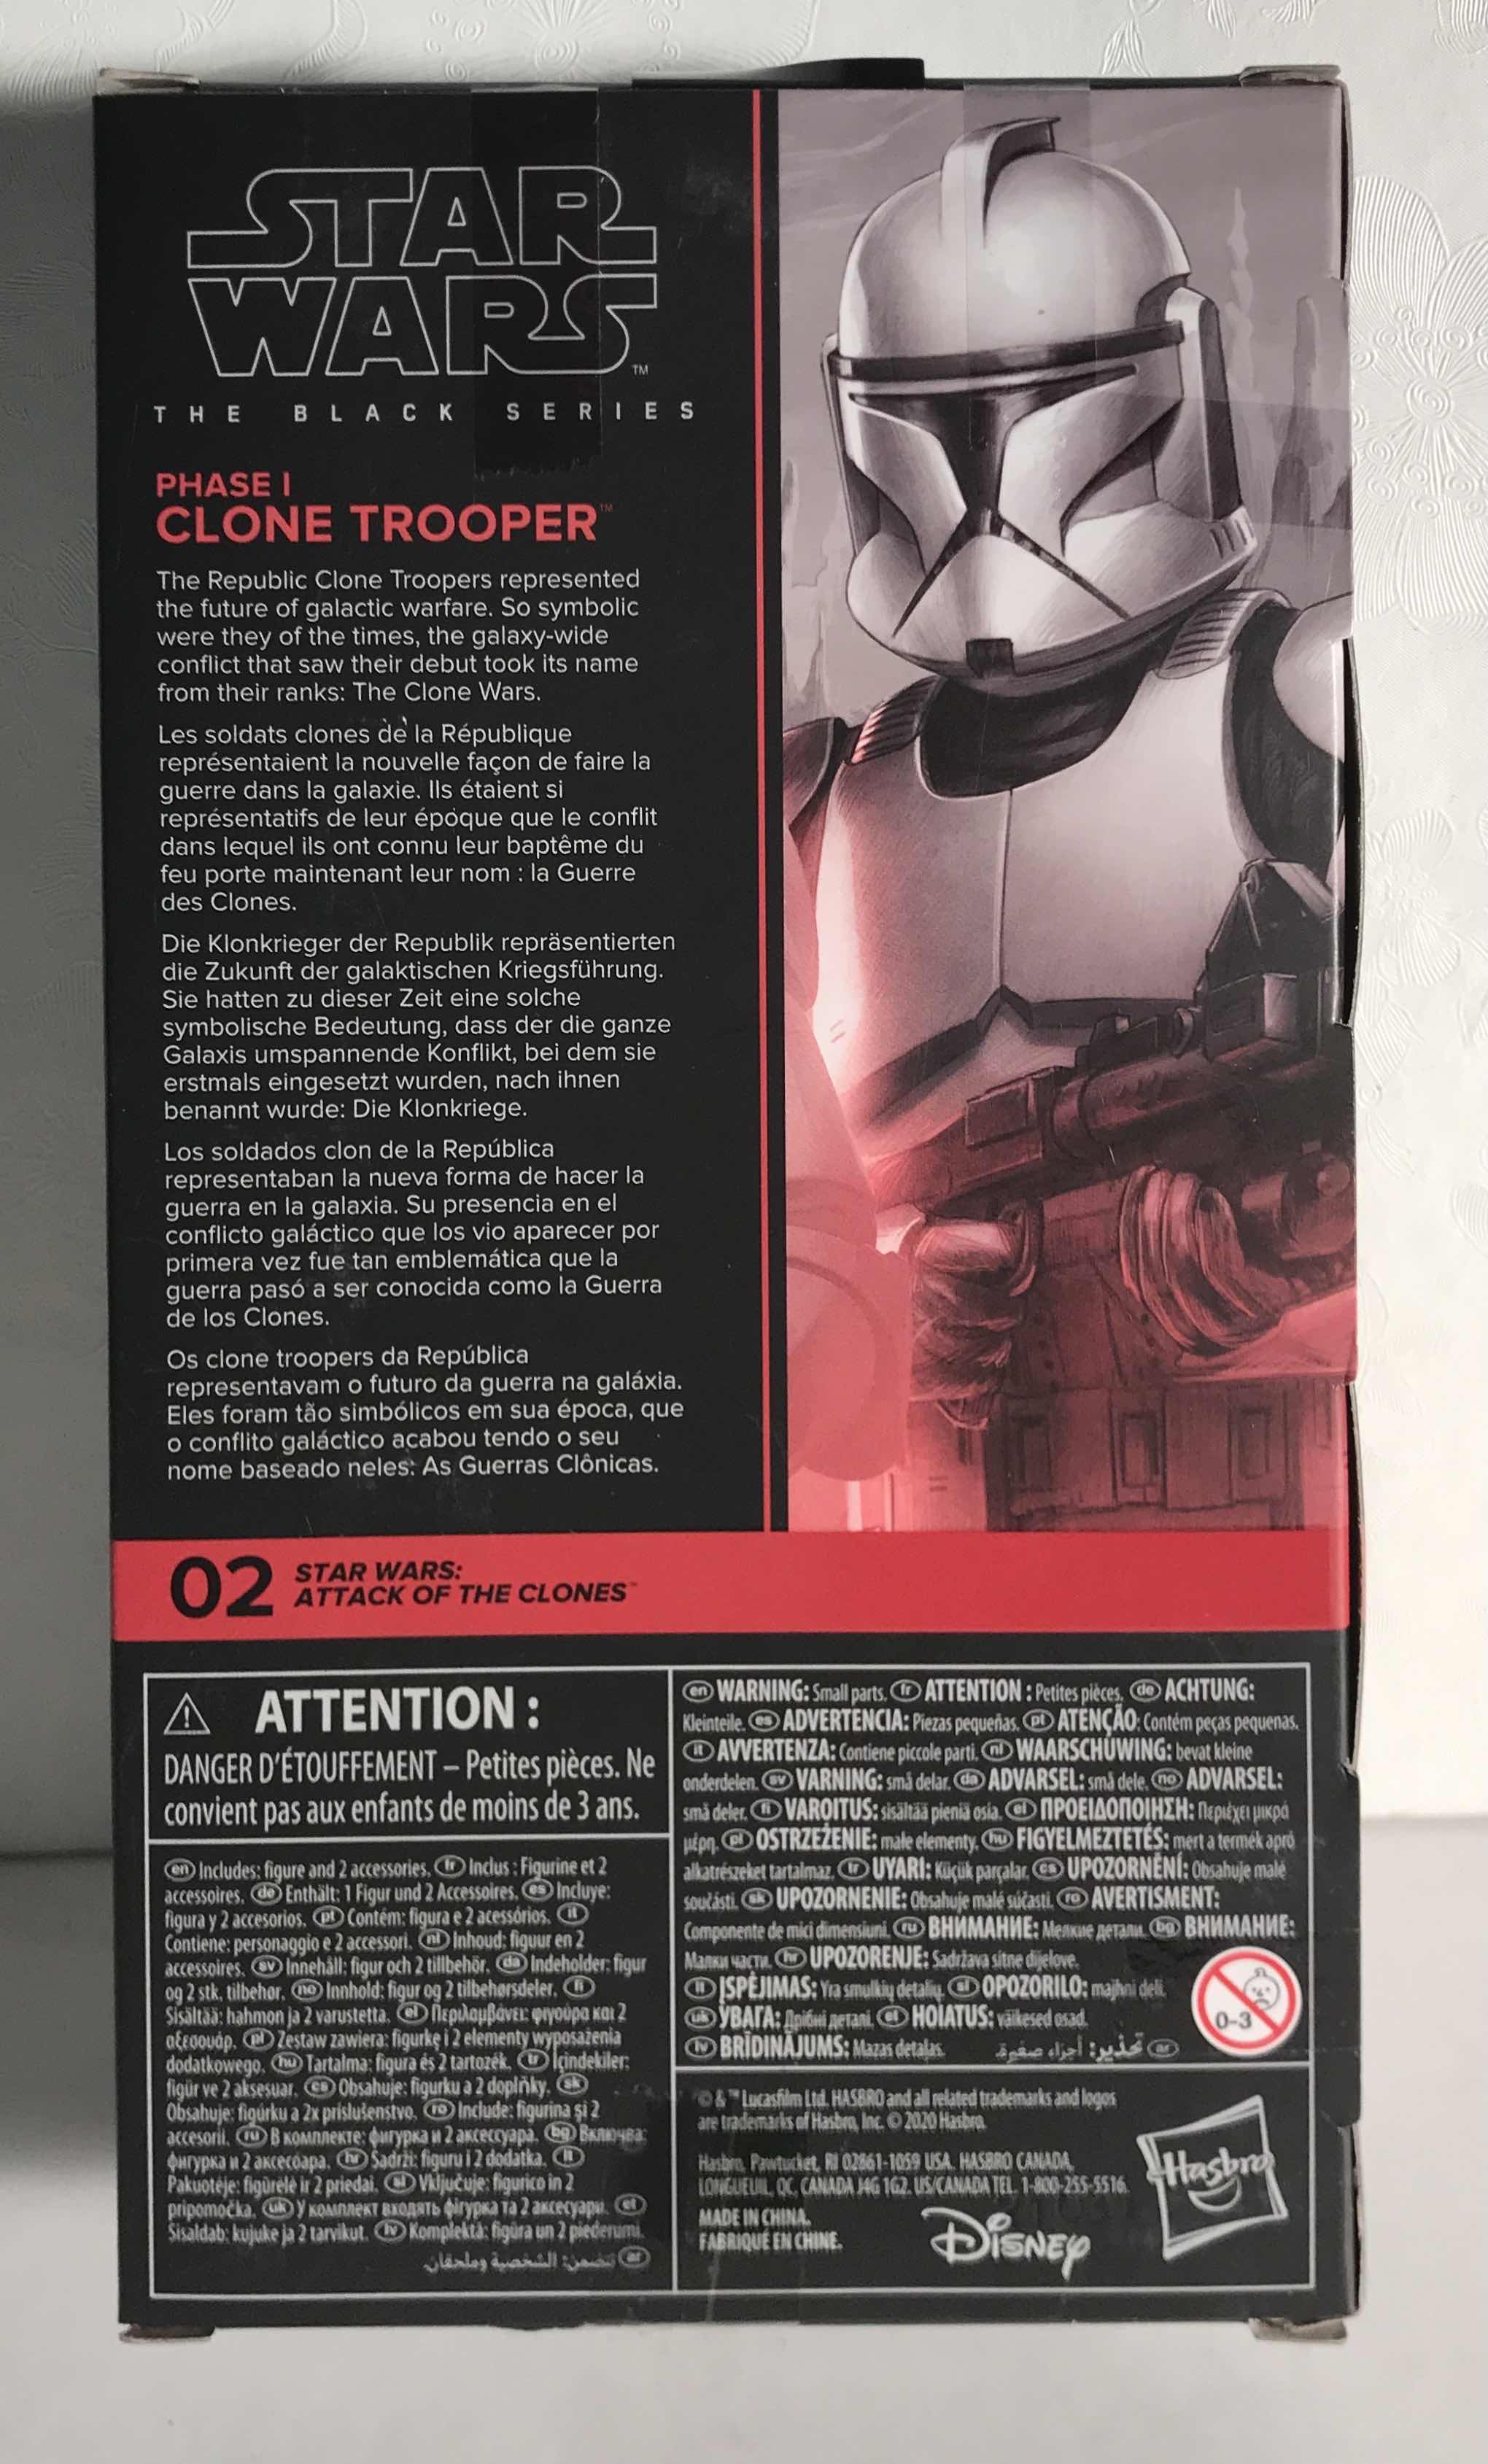 Photo 2 of NIB STAR WARS THE BLACK SERIES “PHASE 1 CLONE TROOPER” ACTION FIGURE- RETAIL PRICE $25.00